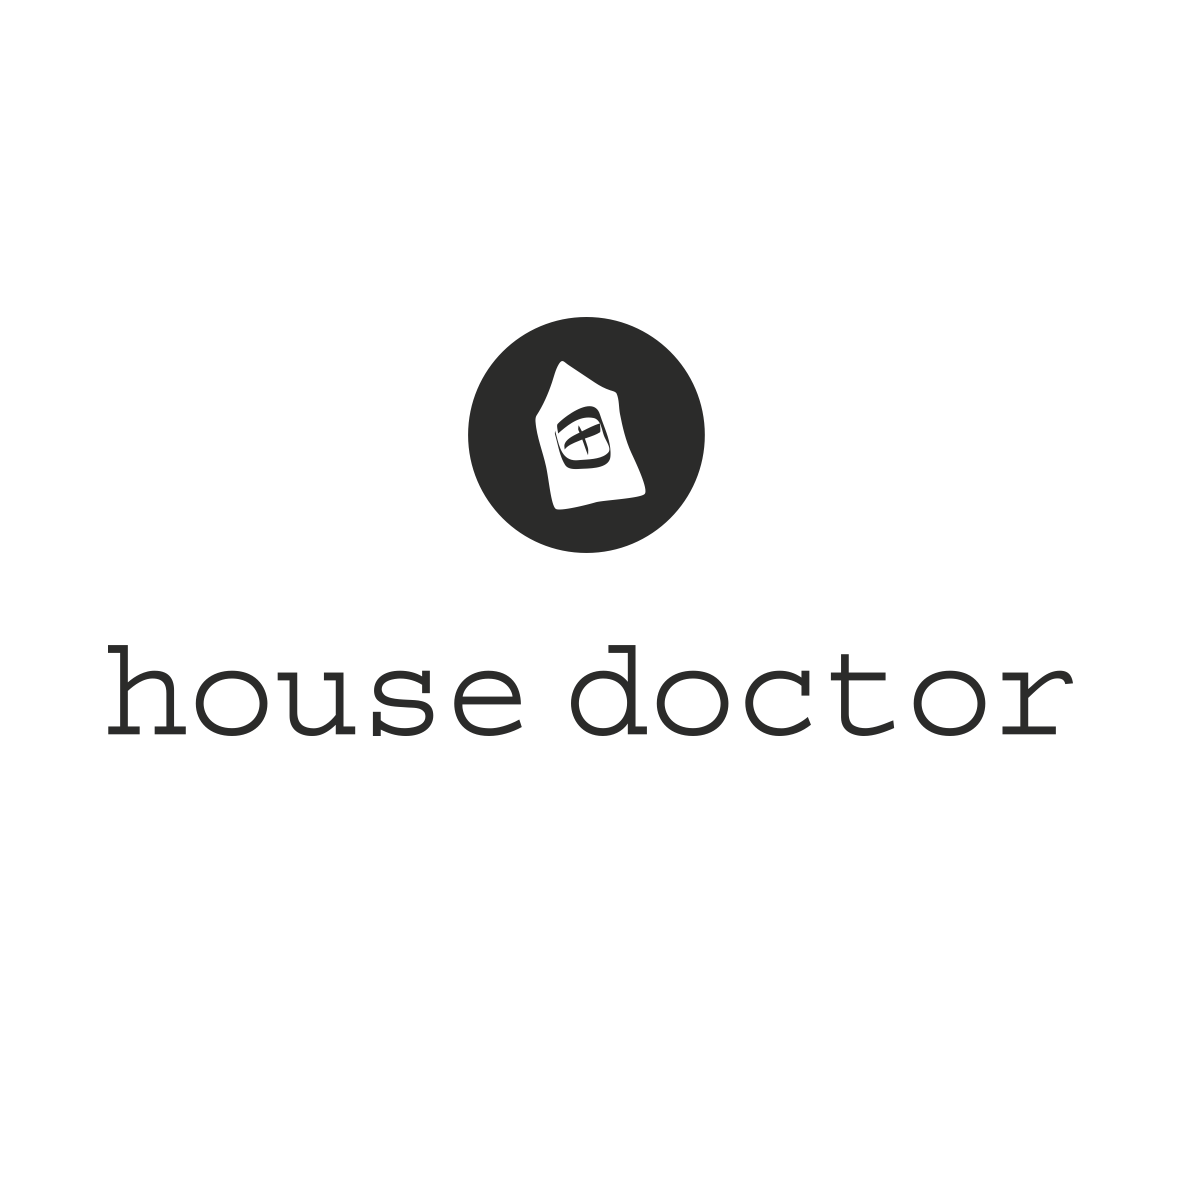 House doctor